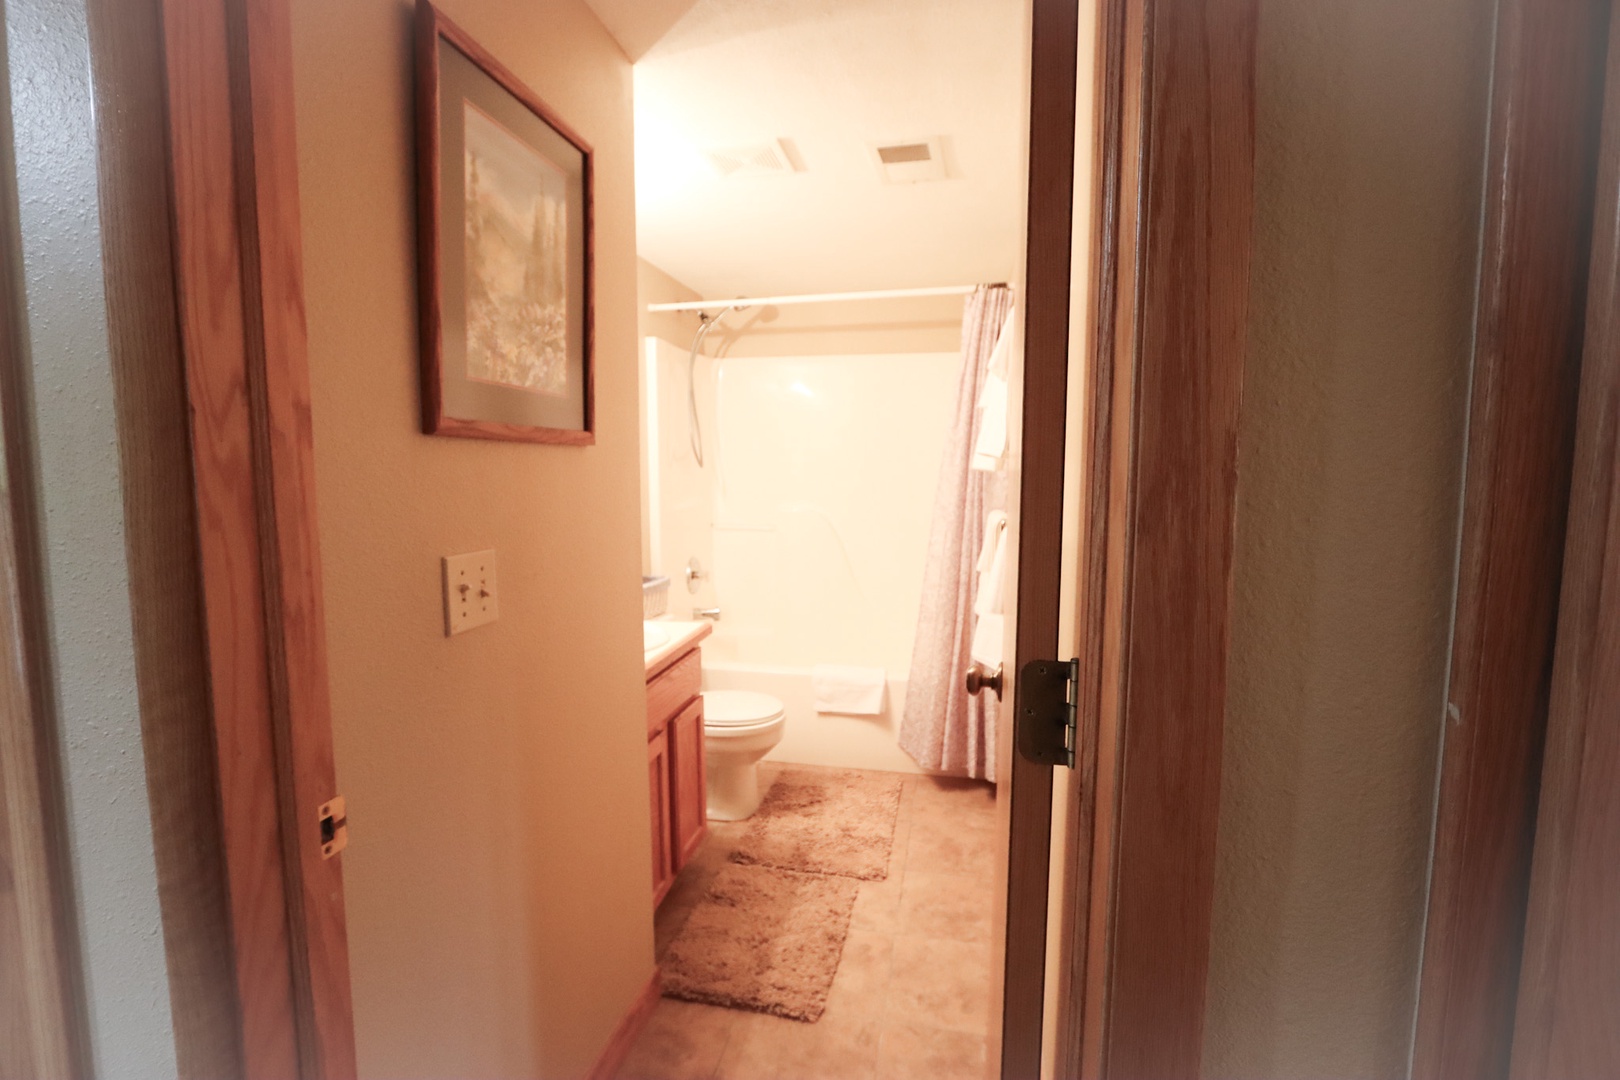 The shared full bathroom offers a single vanity & shower/tub combo